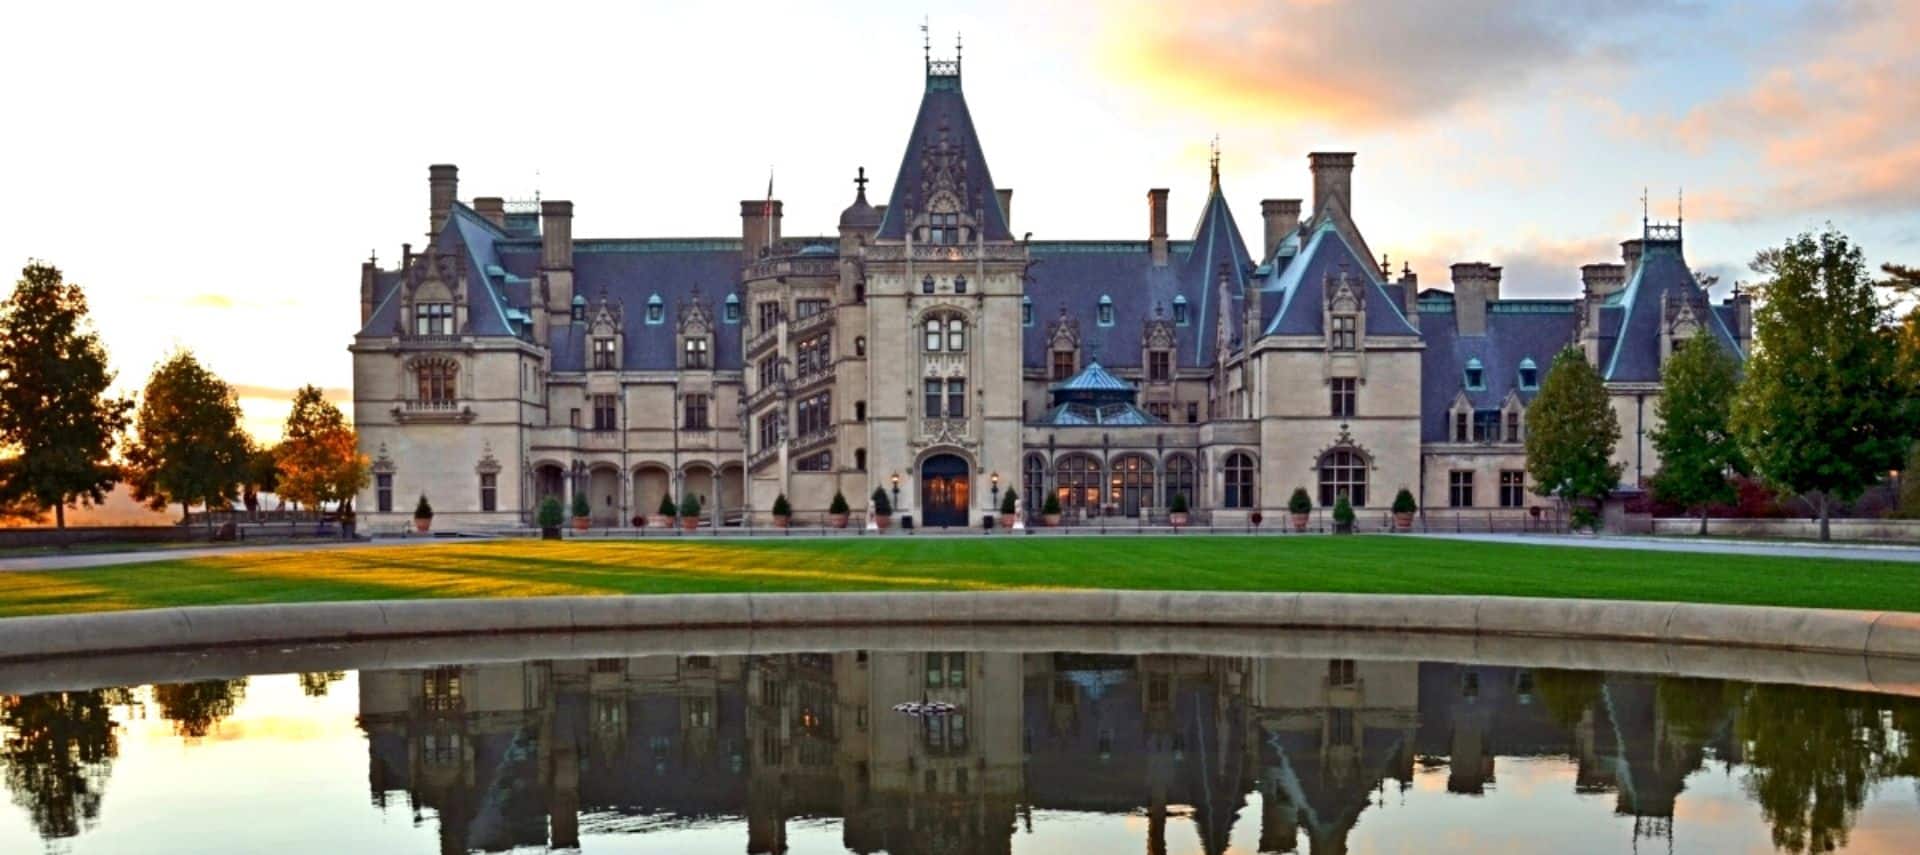 View of Biltmore Estate with reflection in the water